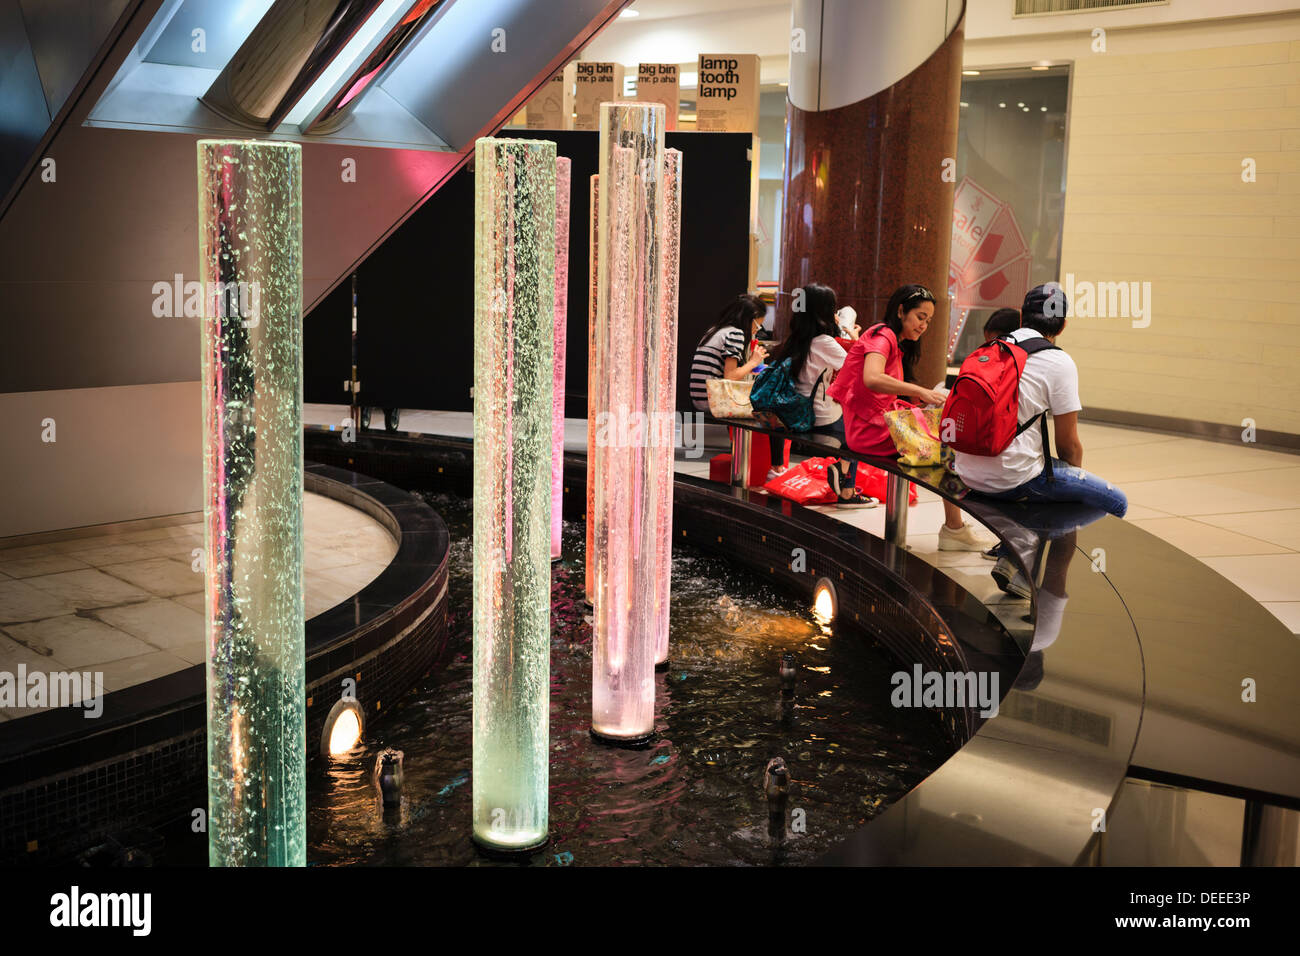 Iconsiam ,Thailand -Oct 30,2019: People can seen exploring around Iconsiam  shopping mall,it is offers high-end brands and an indoor floating market  Stock Photo - Alamy